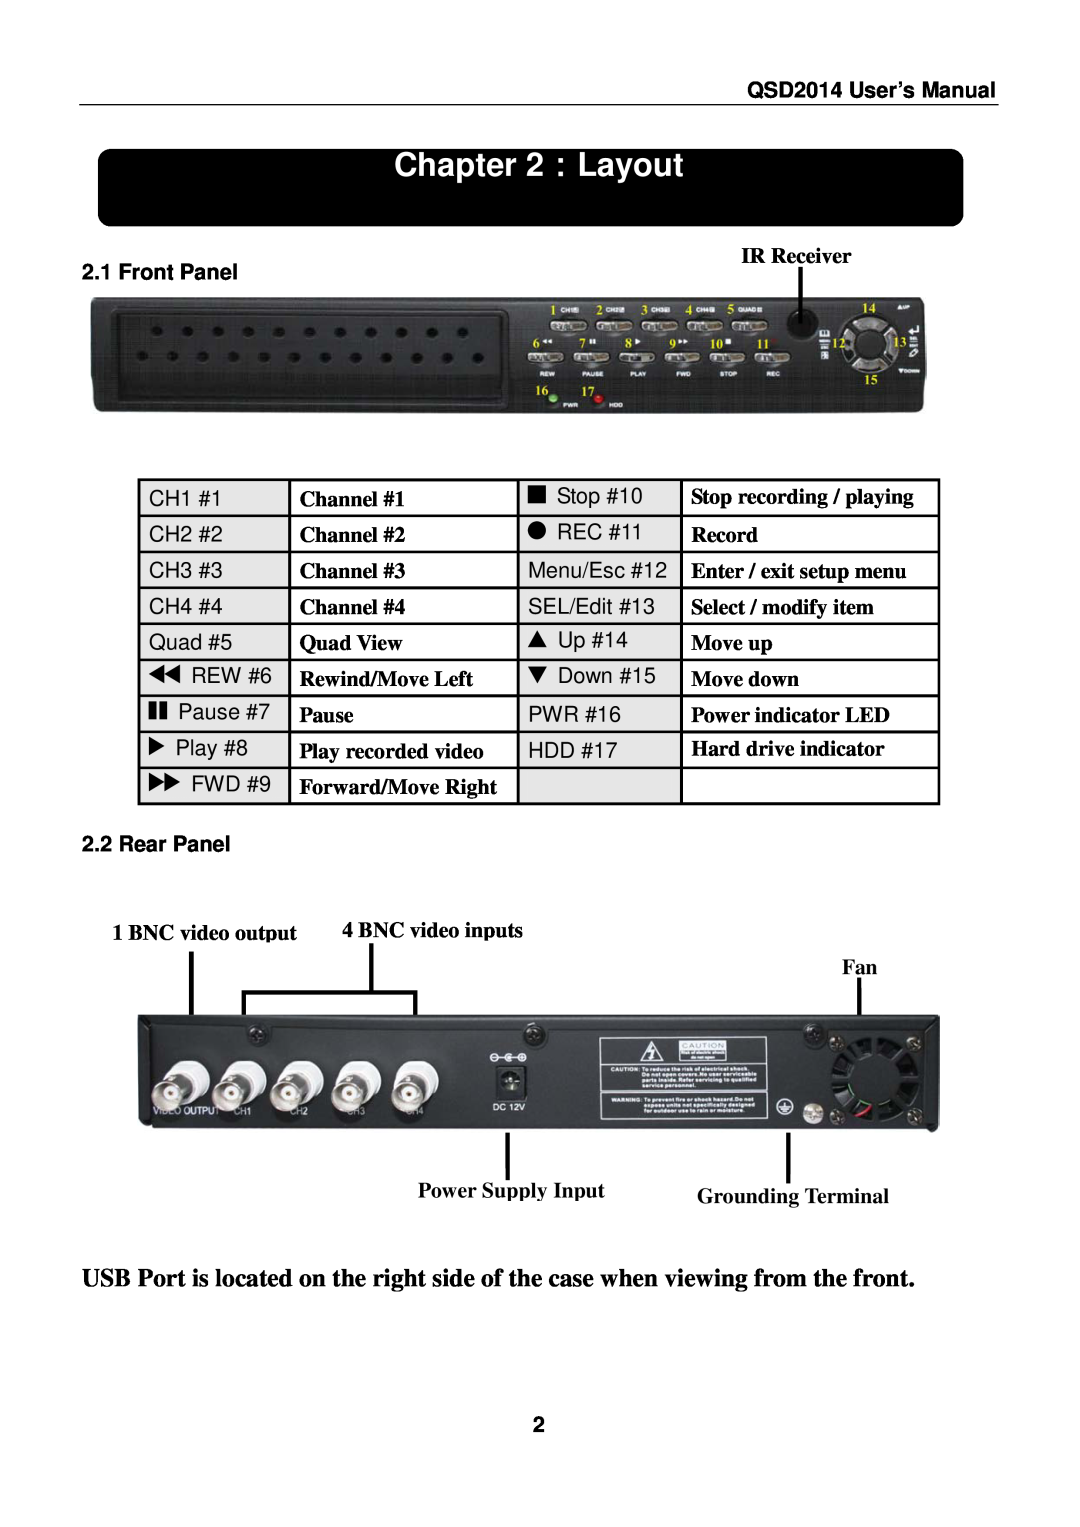 Q-See user manual ：Layout, Front Panel, Rear Panel, QSD2014 User’s Manual 